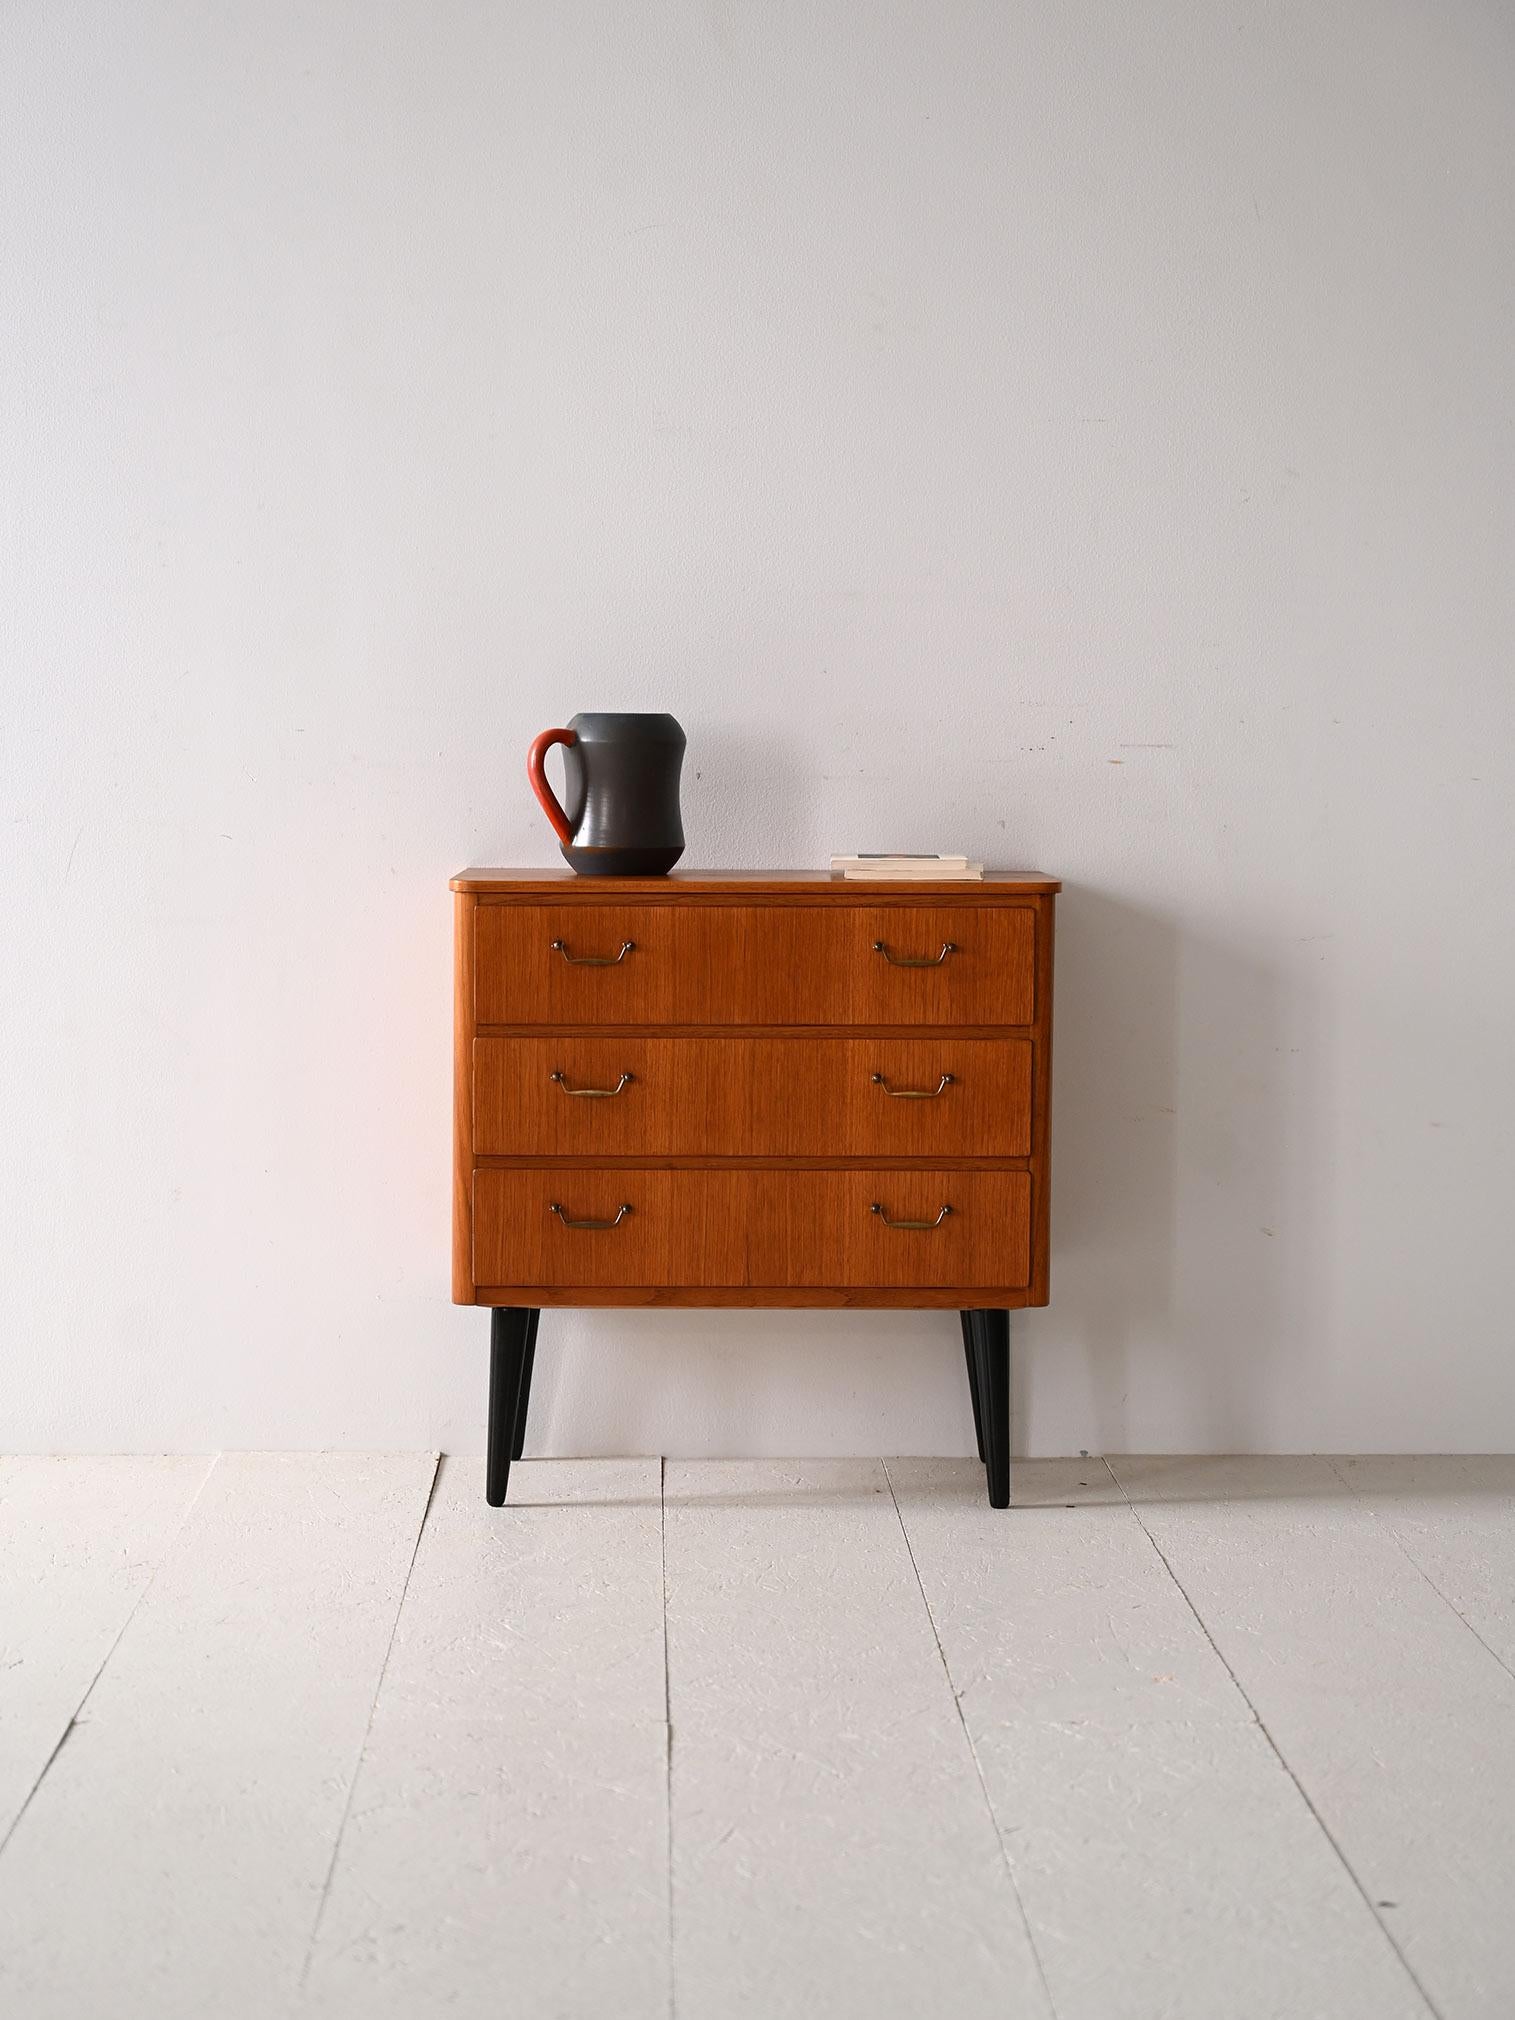 Scandinavian furniture from the 1960s with black painted legs.

An original, small chest of drawers also ideal as a bedside table. It is distinguished by the gilded metal handles on the drawers and the conical wooden legs painted black.
The modern